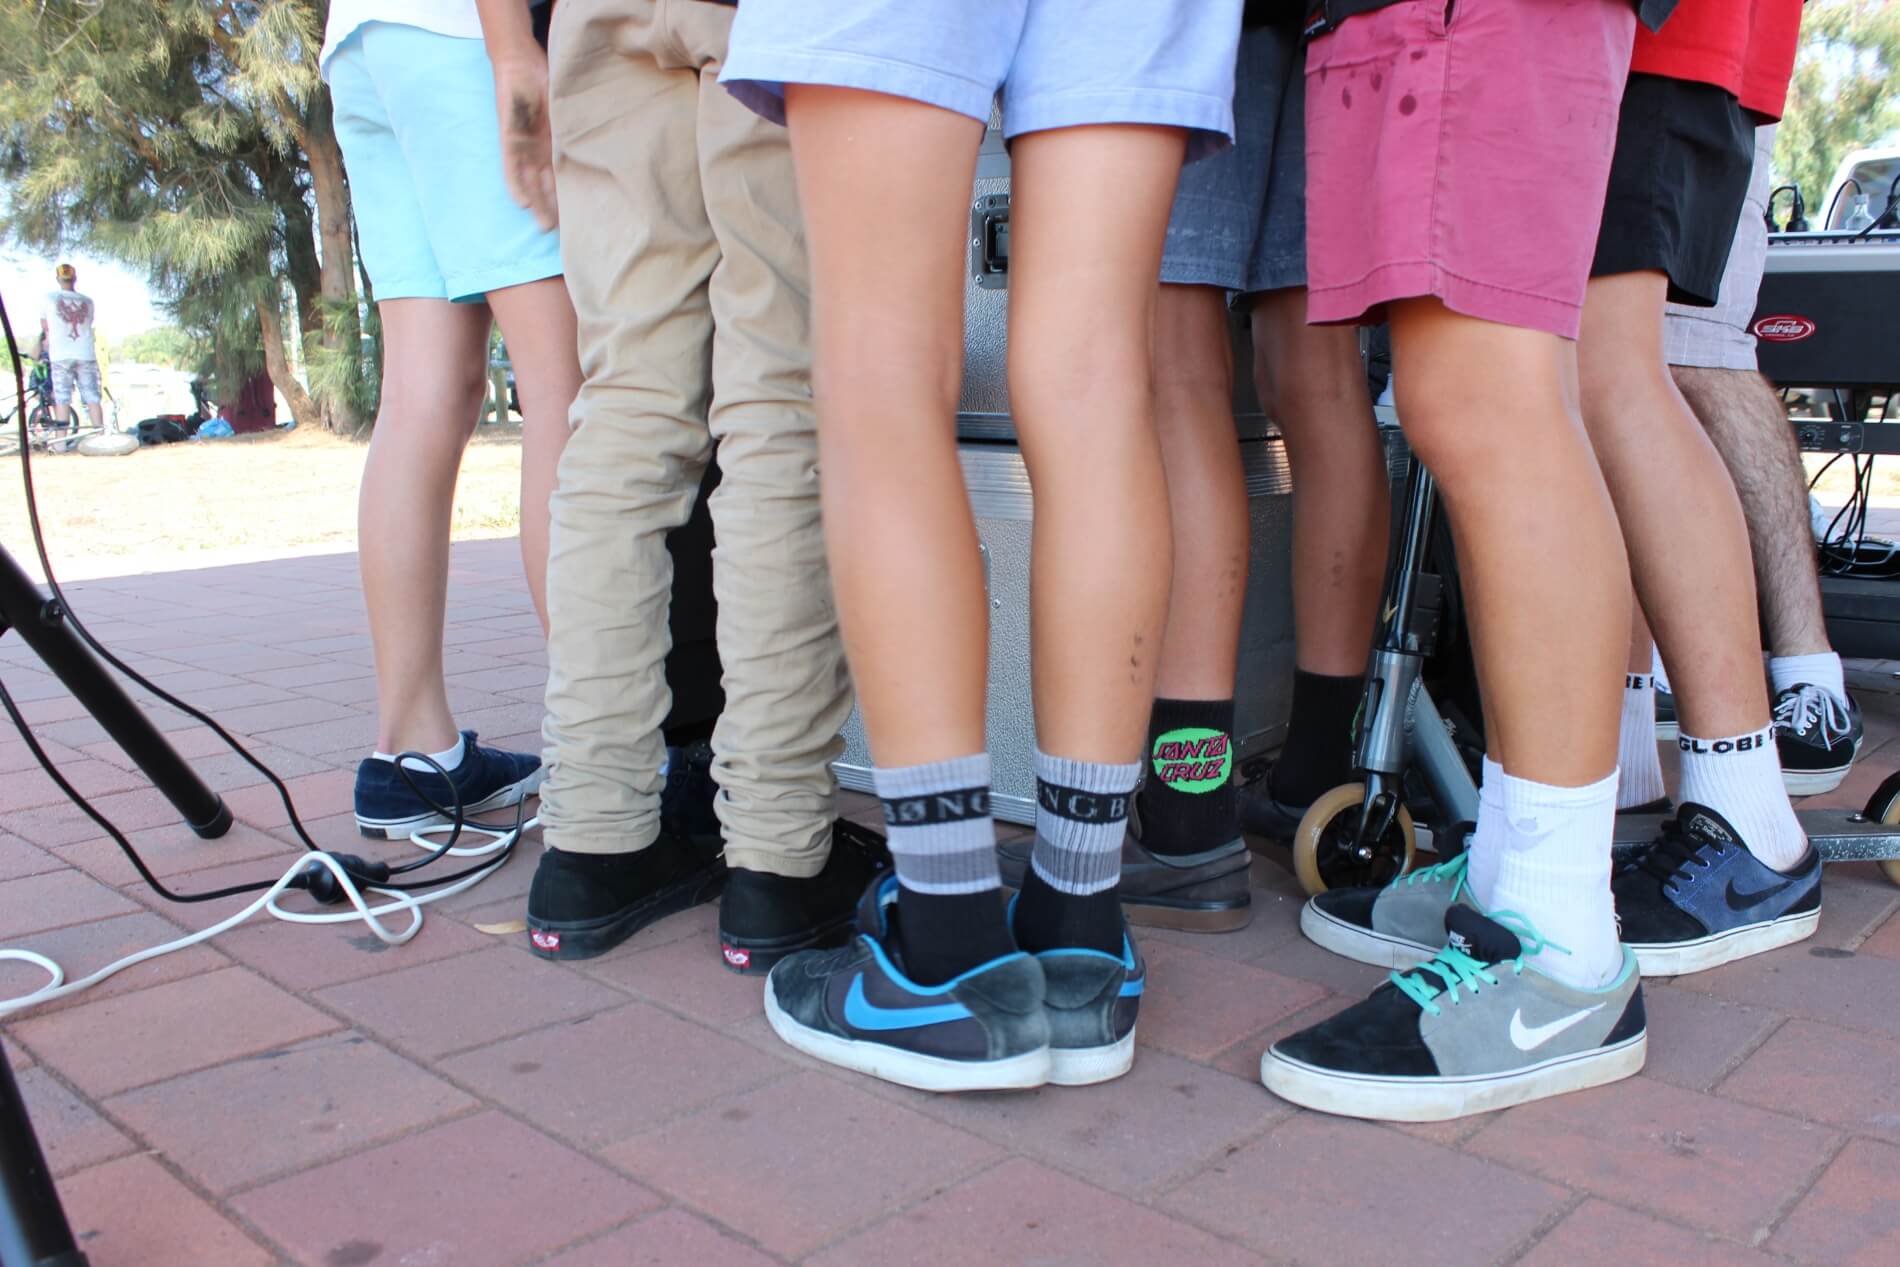 Kids listening to music at DJ stand - view of feet